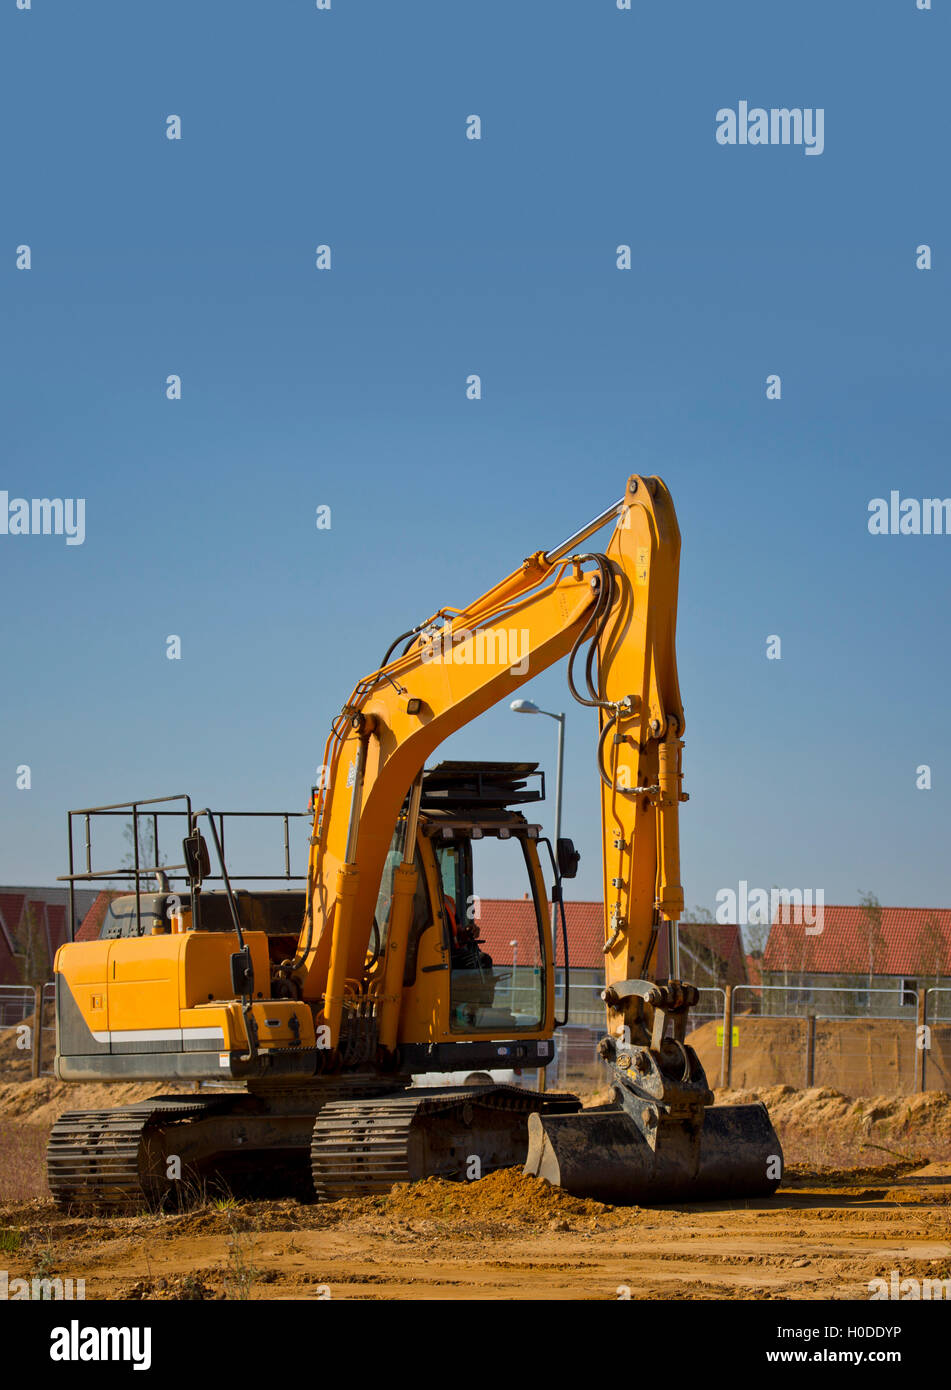 A digger or earth mover or backhoe on a construction site or building site Stock Photo